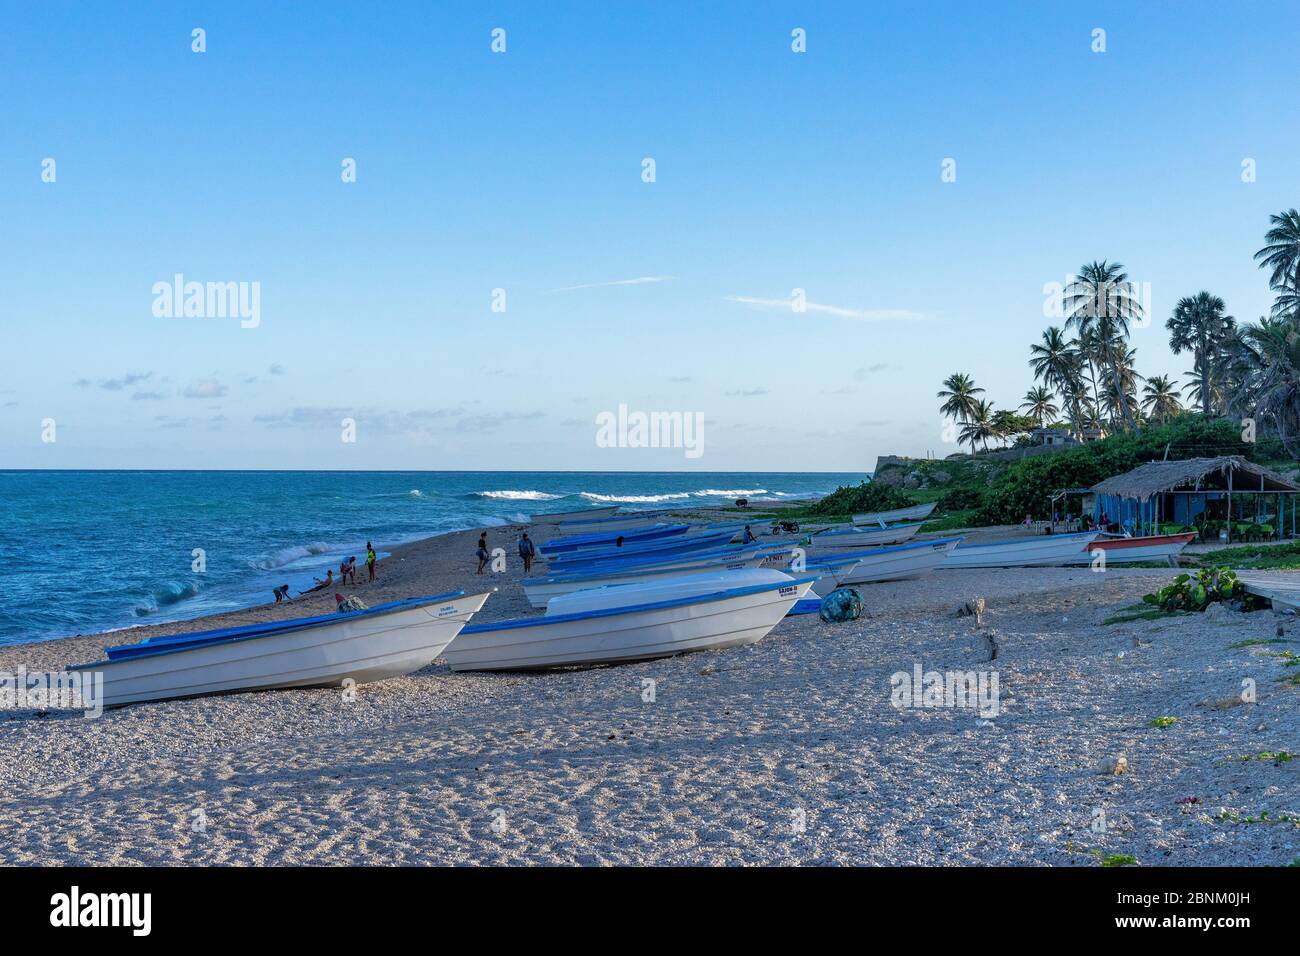 America, Caribbean, Greater Antilles, Dominican Republic, Barahona, Los Patos, beach scene at Playa Los Patos in the afternoon Stock Photo